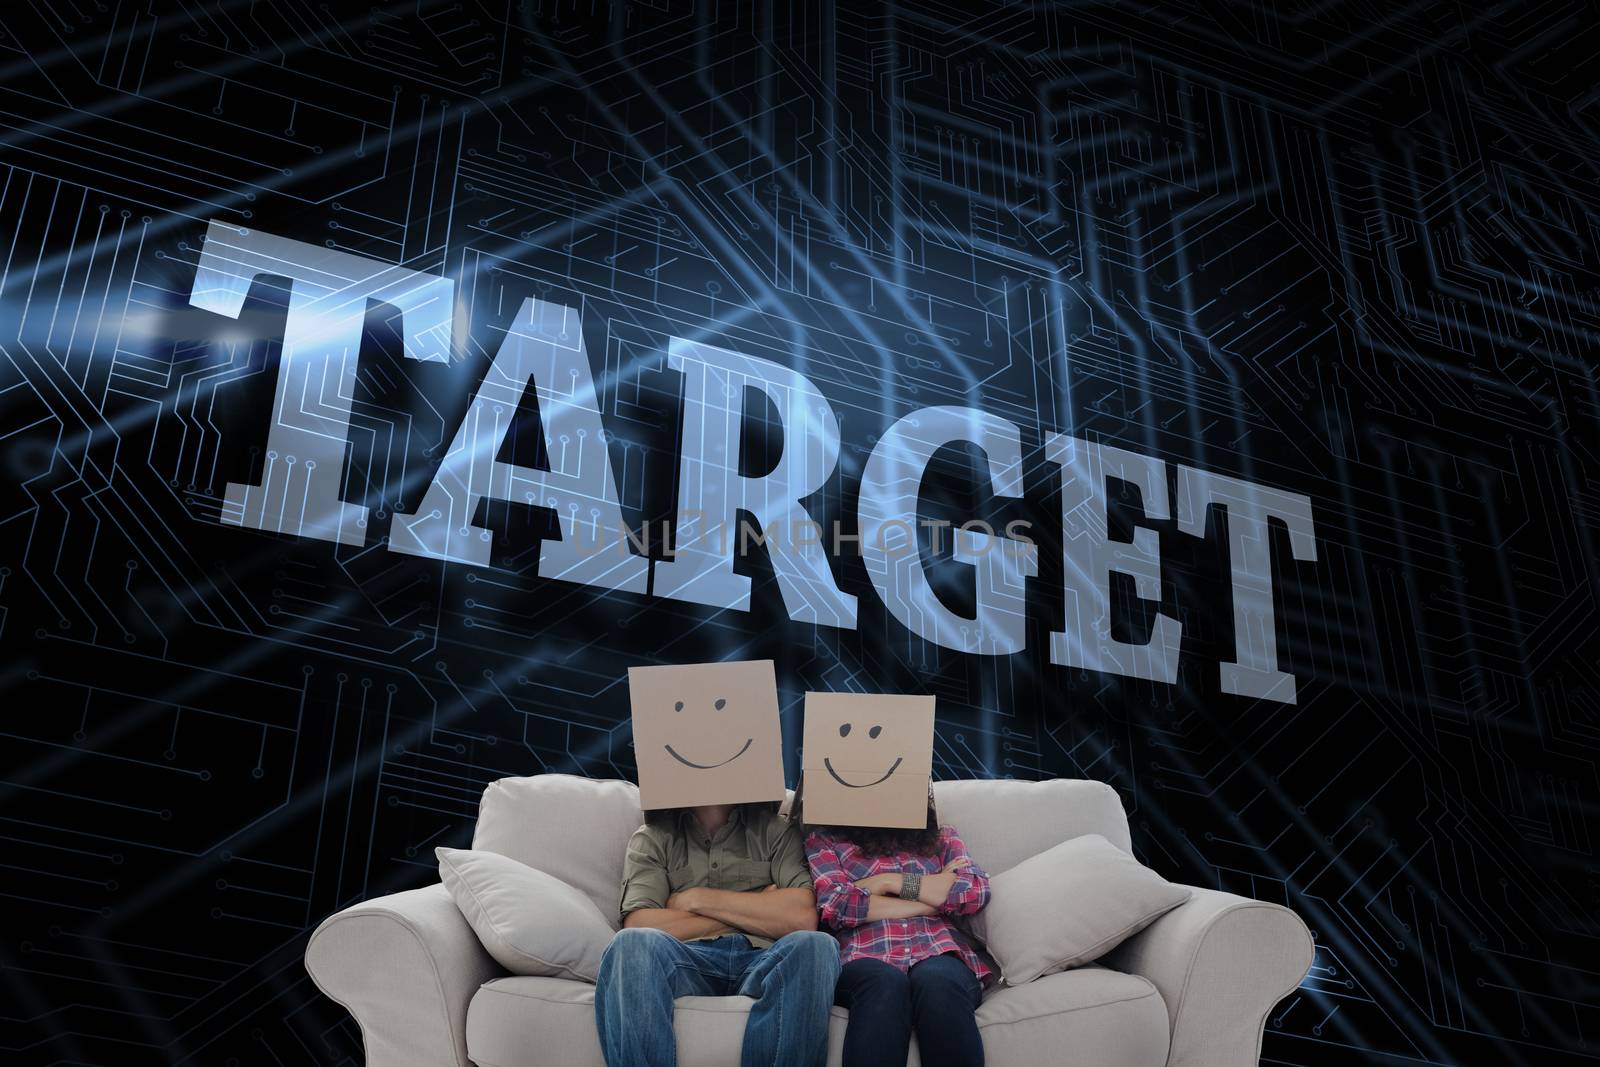 Target against futuristic black and blue background by Wavebreakmedia